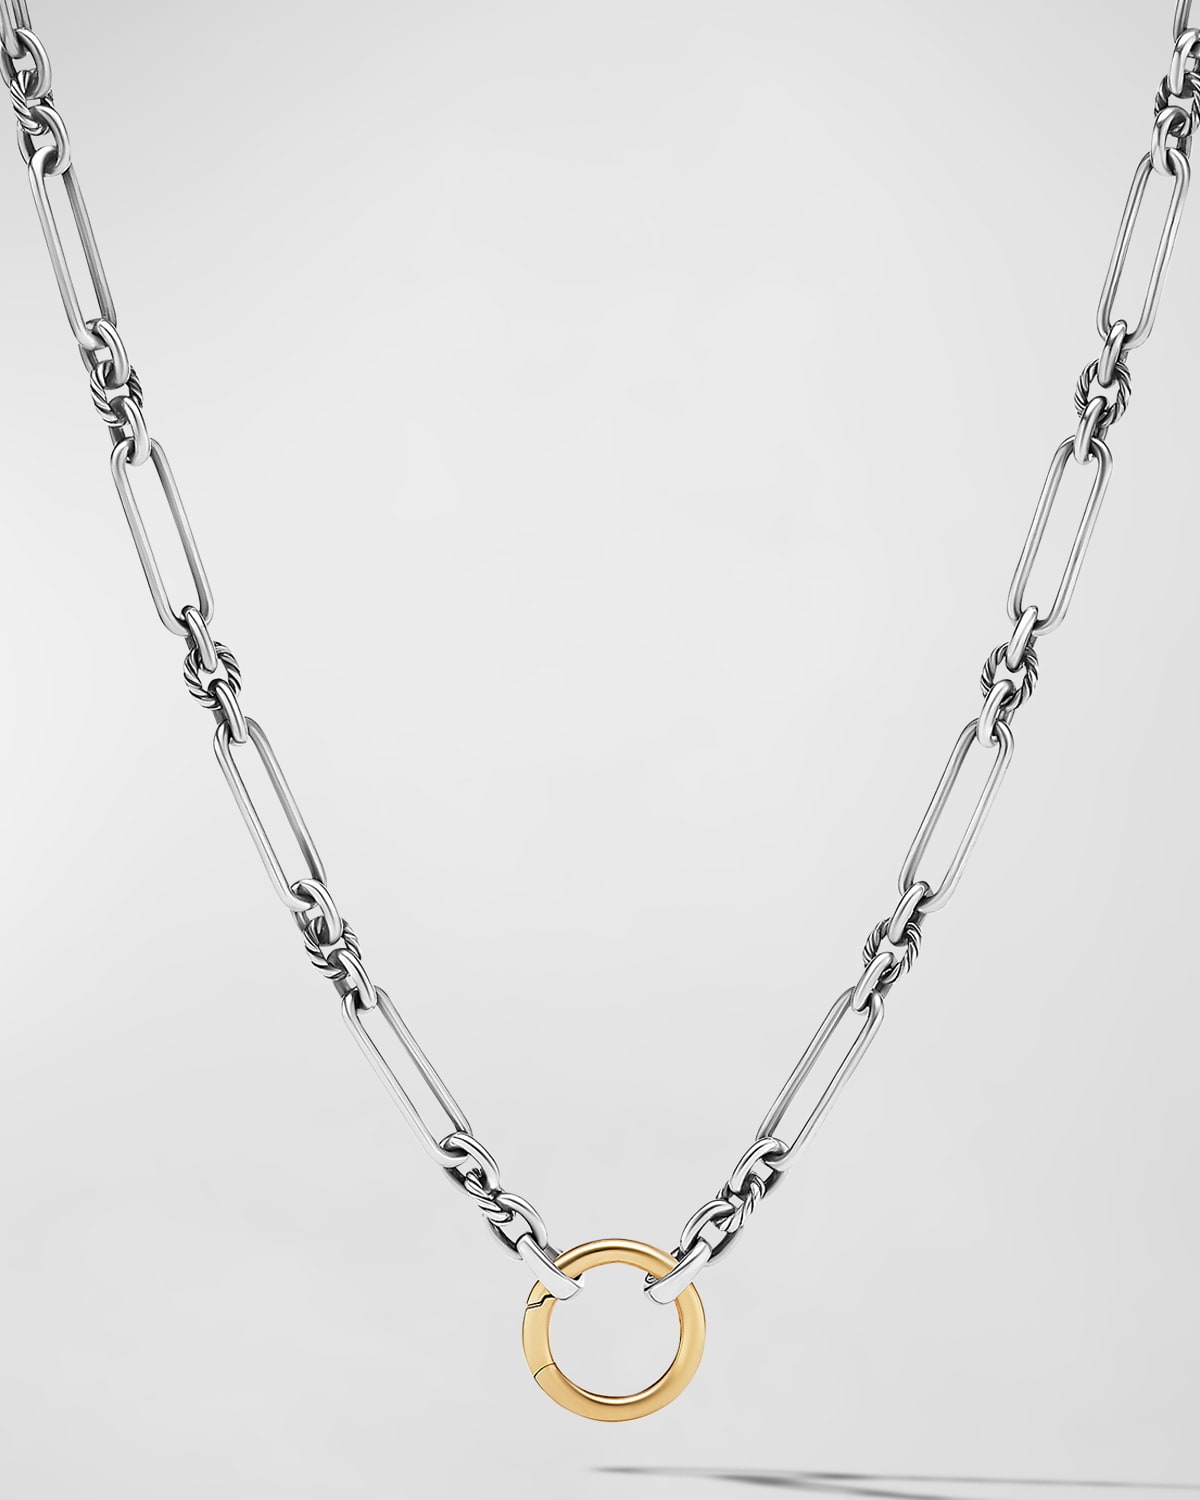 David Yurman Lexington Chain Necklace In Silver With 18k Gold, 4.5mm In S8